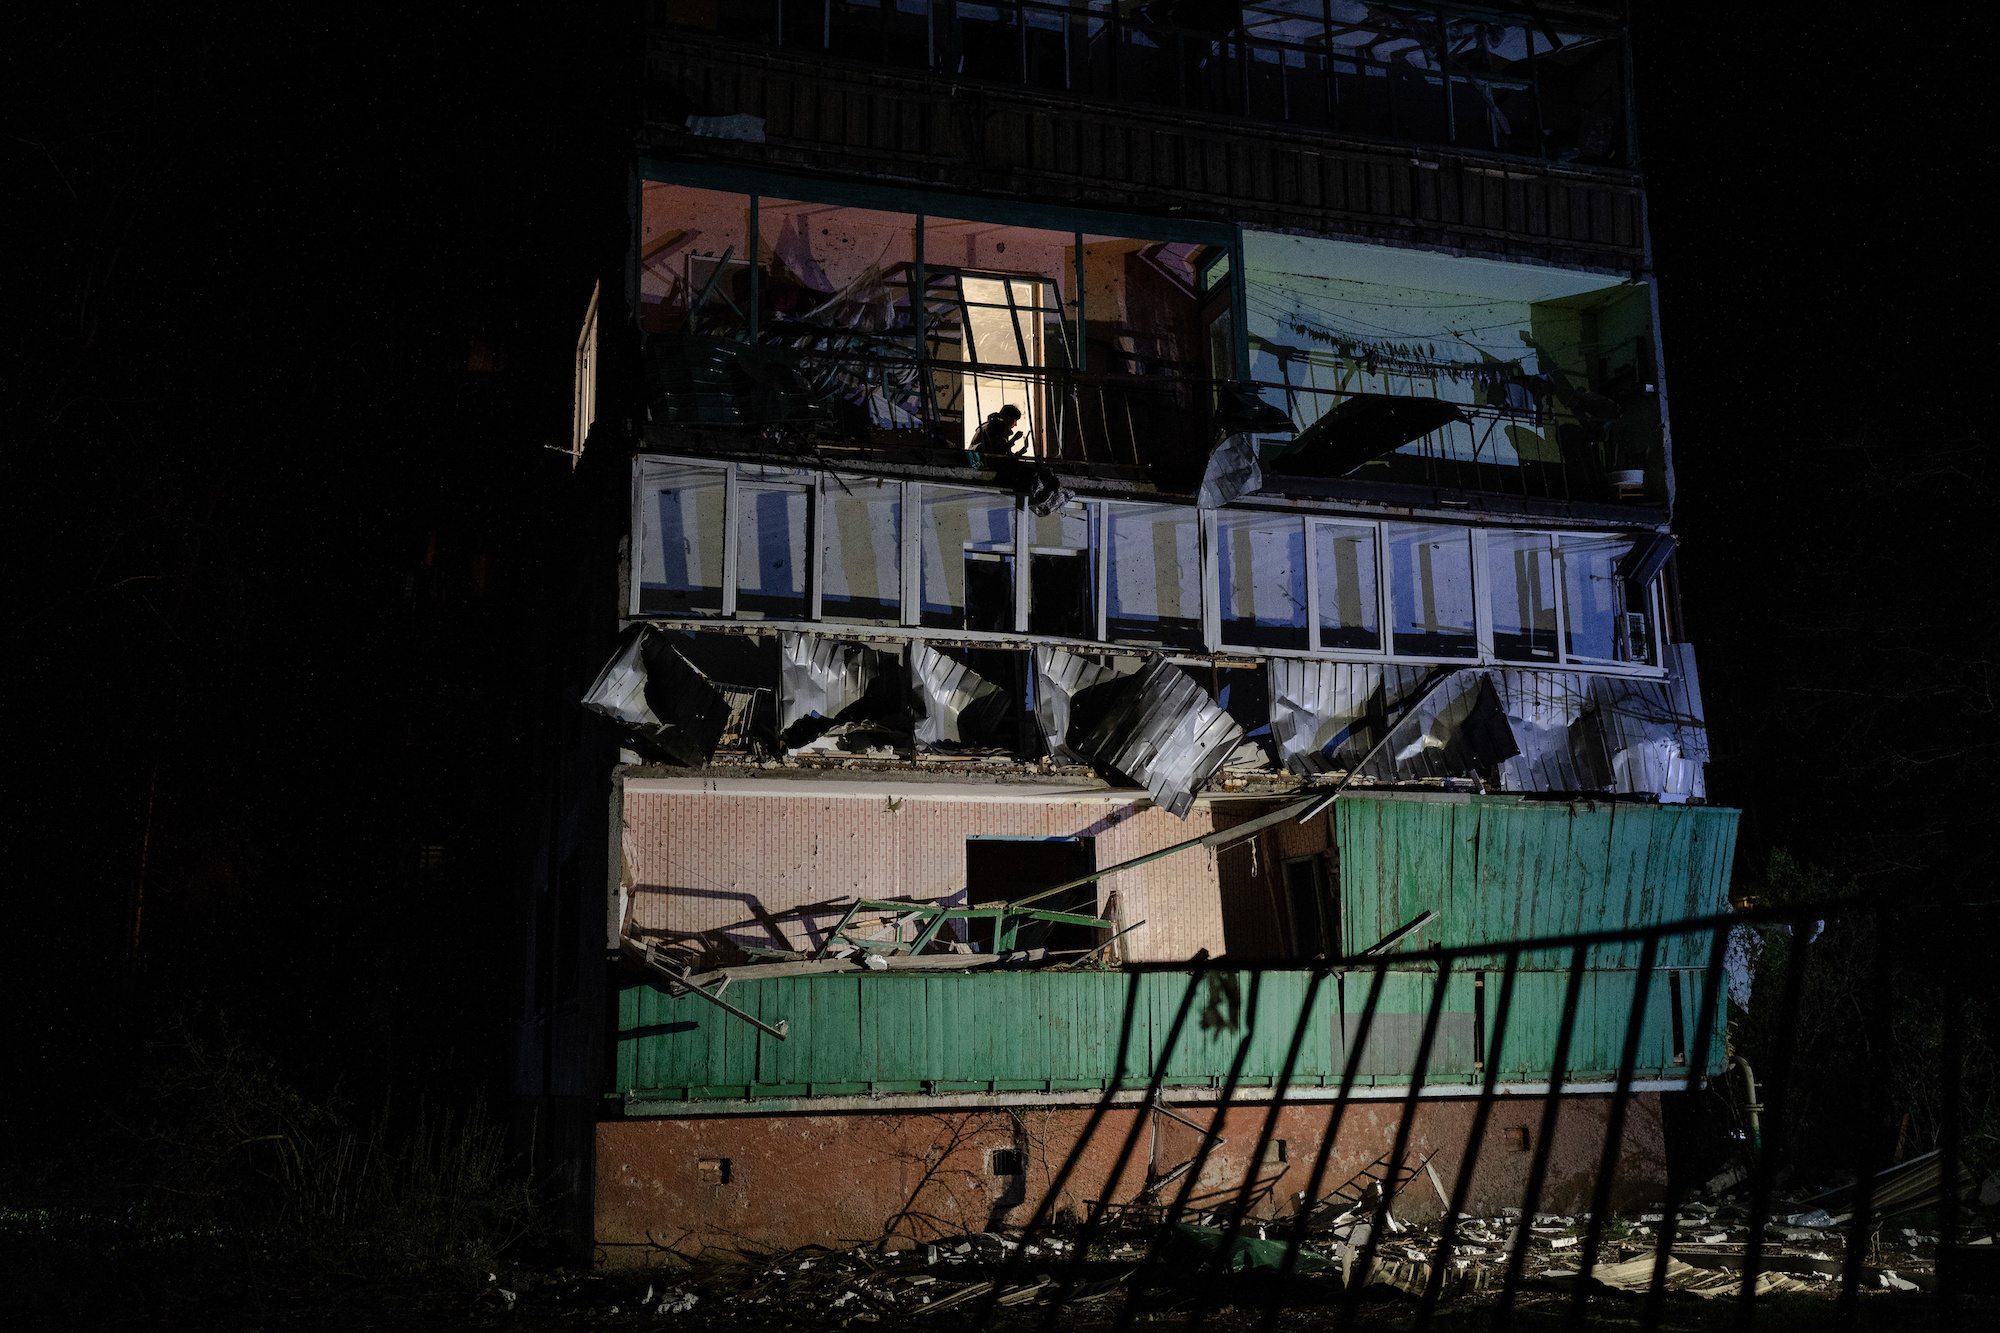 A resident in Sloviansk is seen clearing debris from his home in the damaged building following a rocket strike by the Russian forces on Thursday.